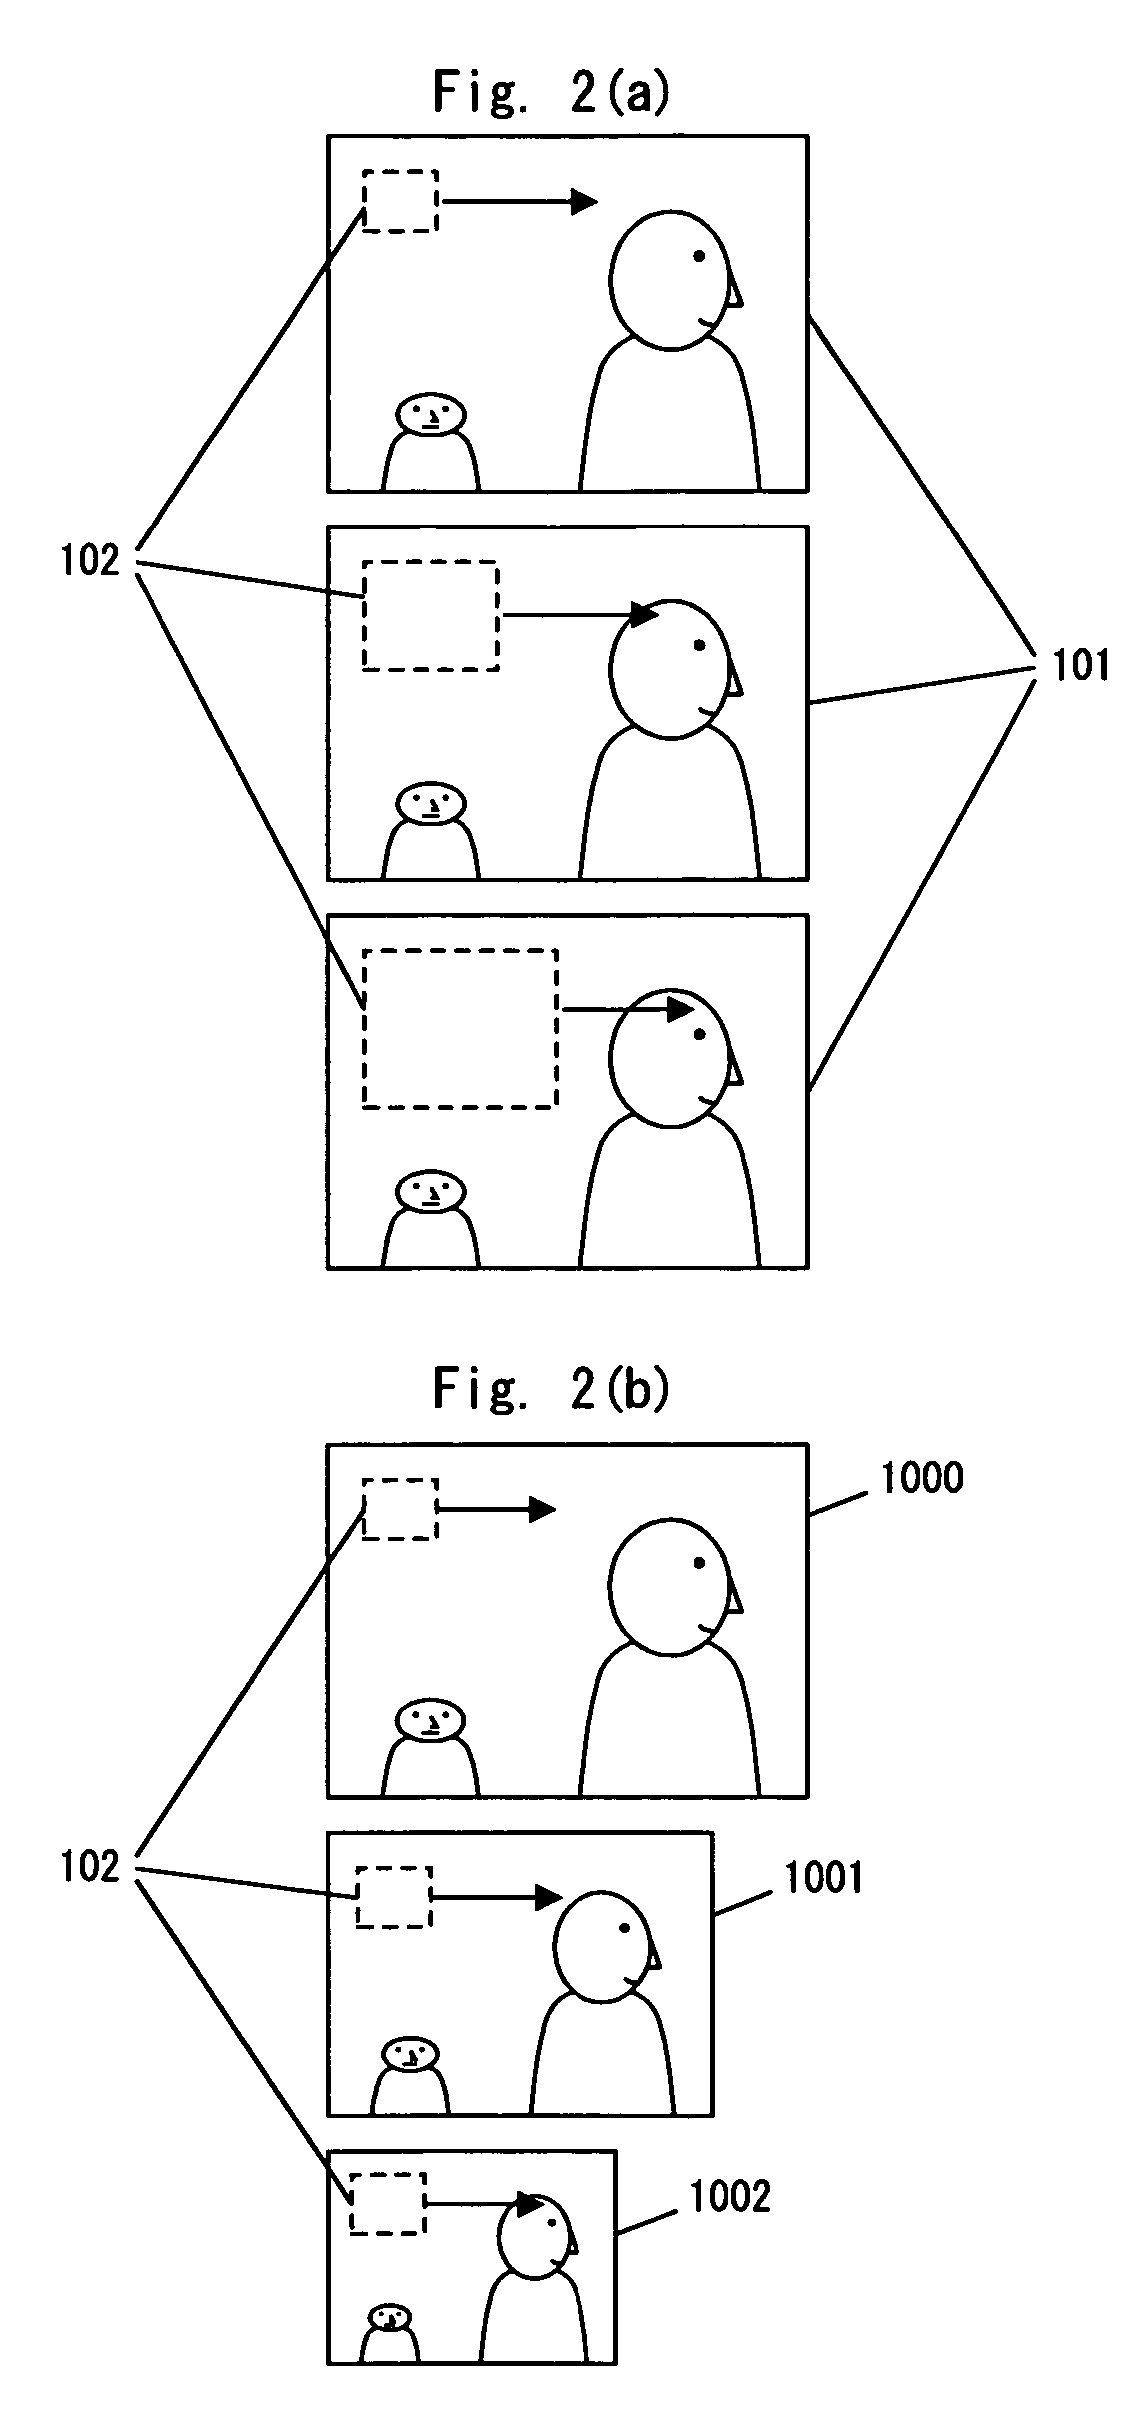 Face detection device